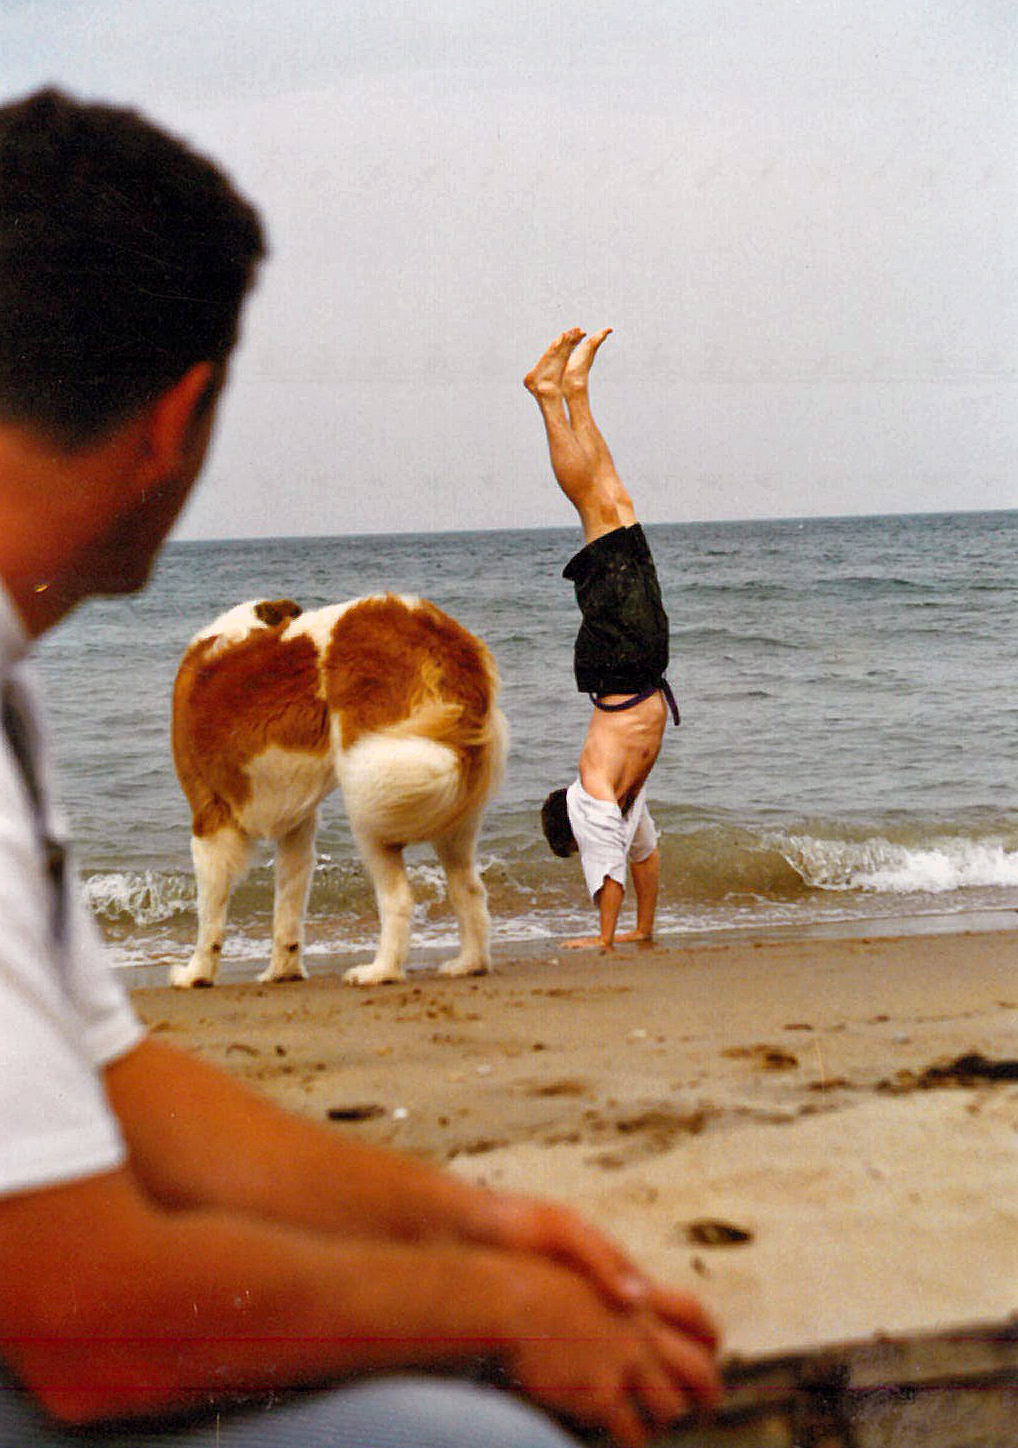 Tom Mckenzie doing a handstand on the beach was used not only as a cover photo, but also for Pulse promotions for years, with the caption “Turning the county upside down.” Photo by Dave Eliot.